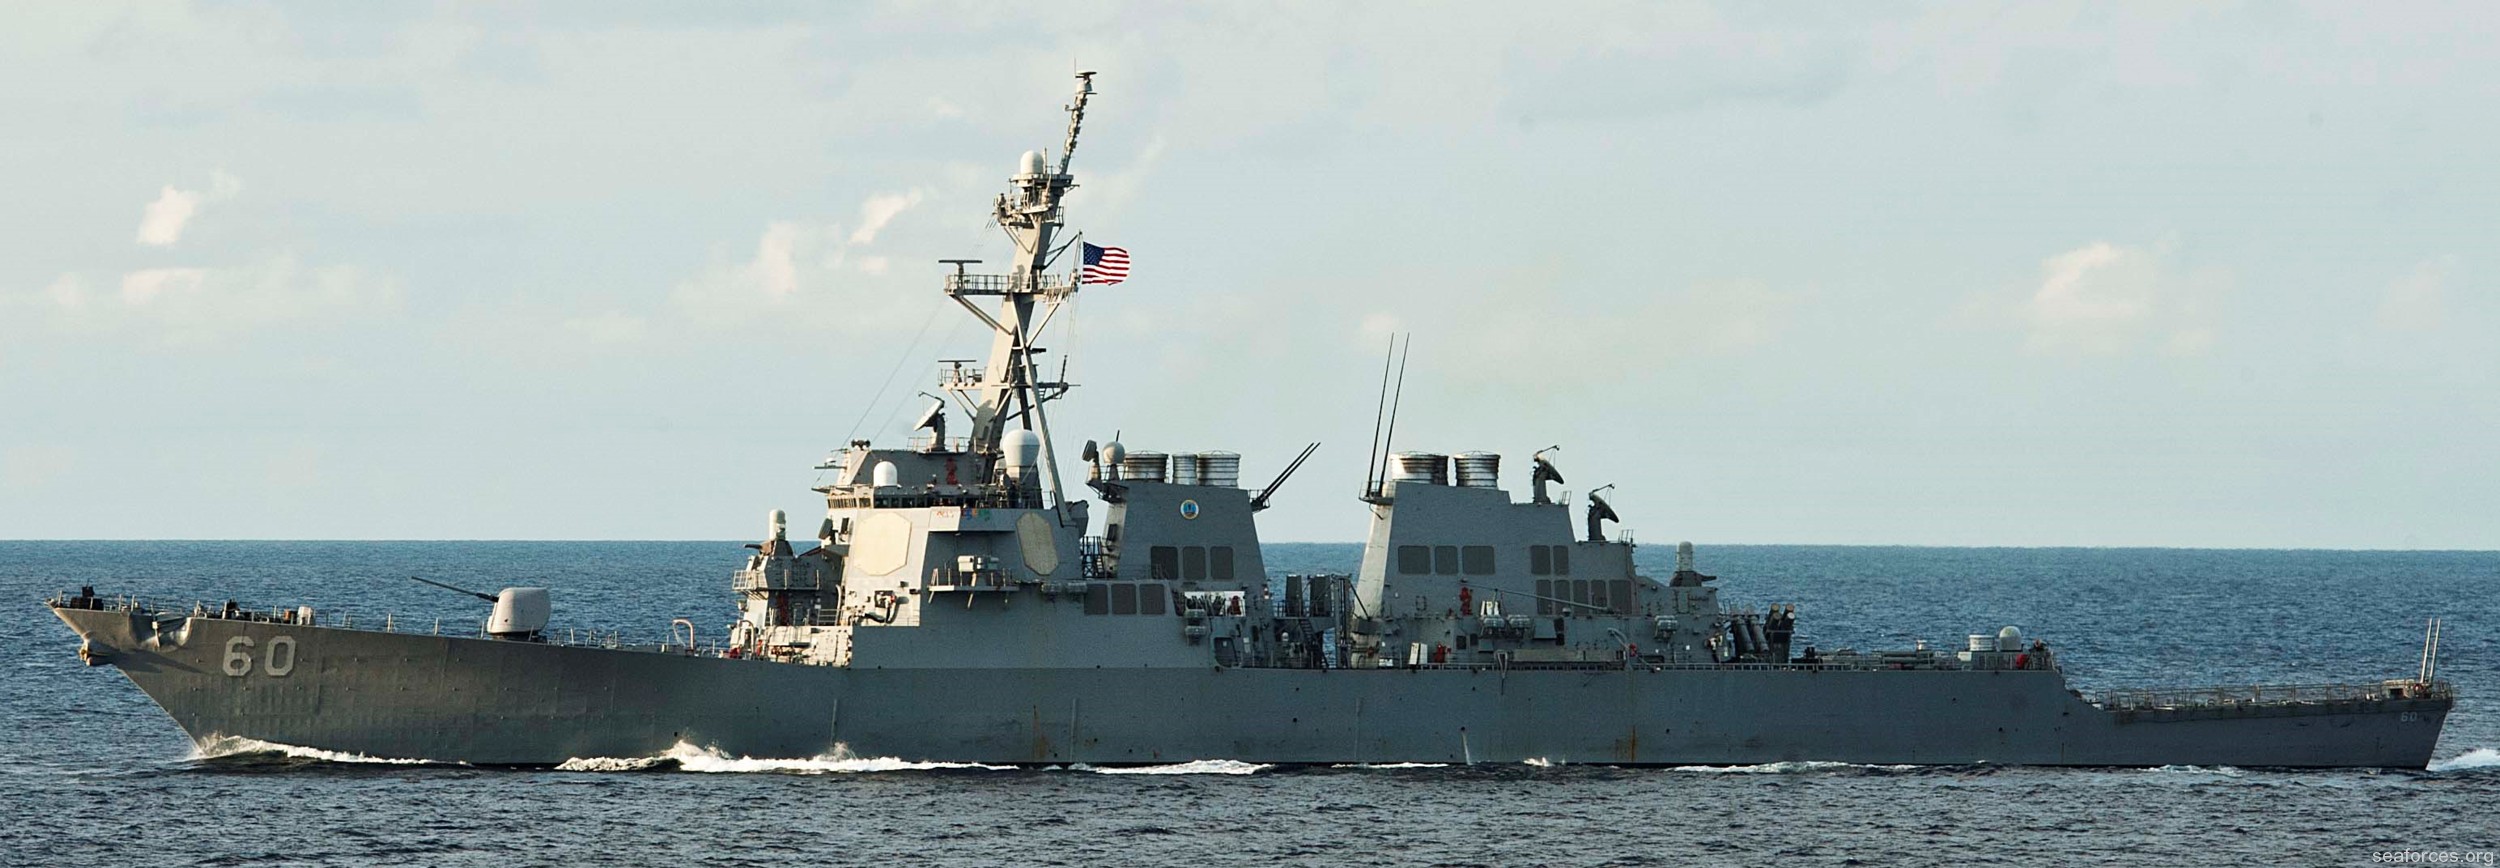 ddg-60 uss paul hamilton guided missile destroyer us navy 09 andaman sea